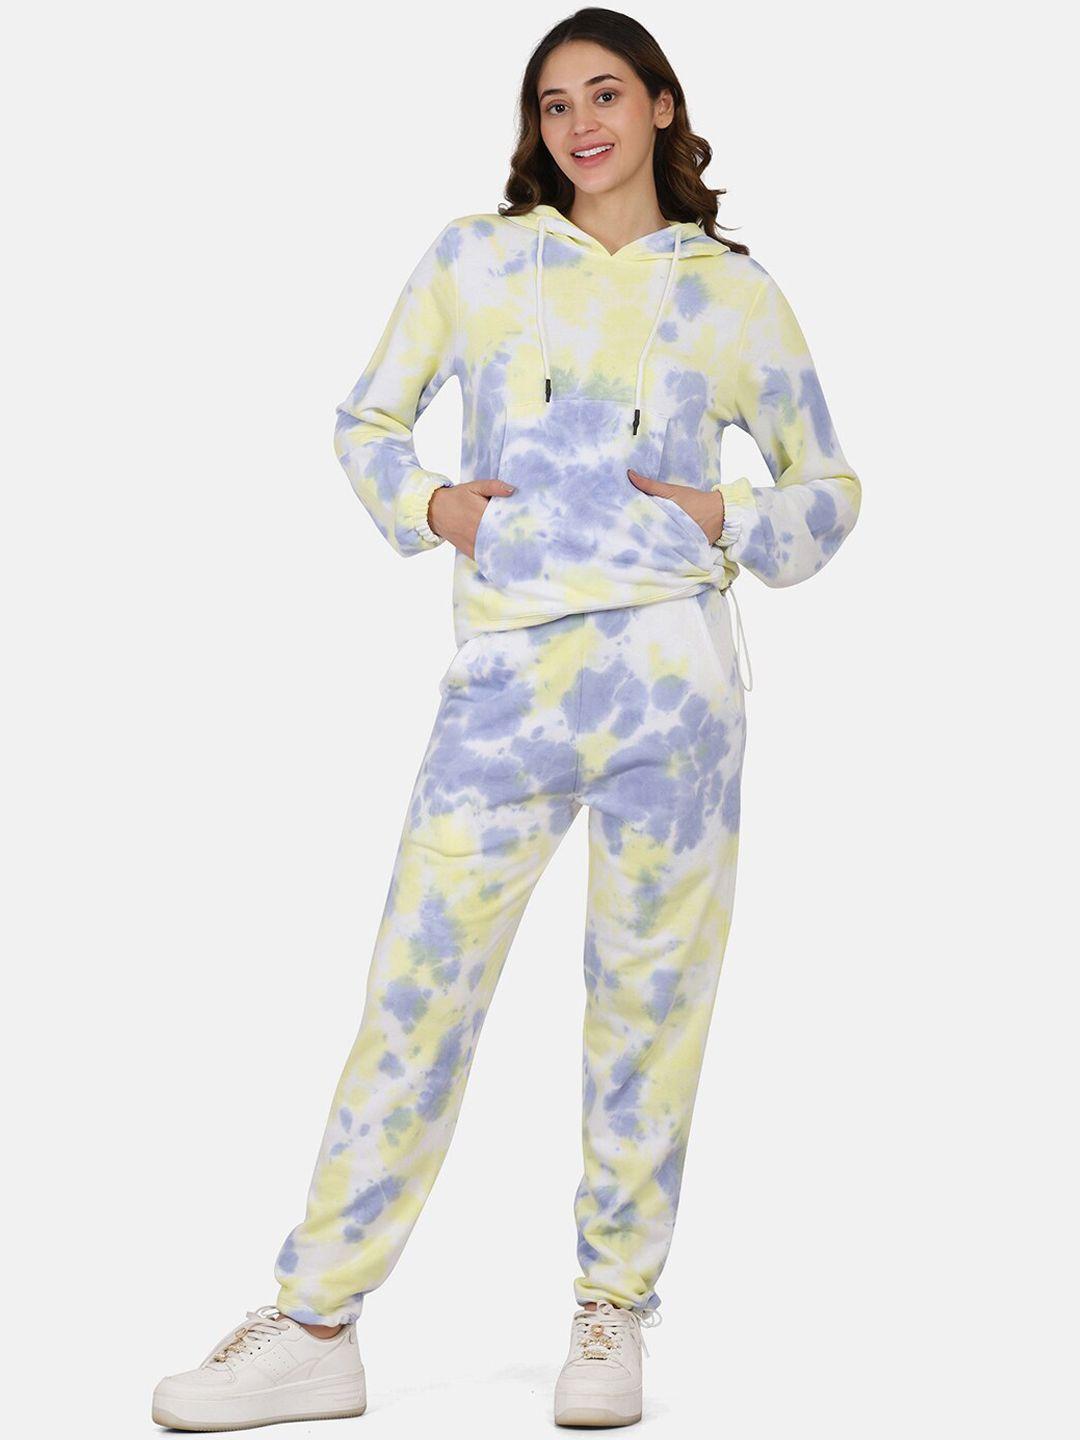 aesthetic bodies women yellow & blue pure cotton tie-dye hoodie co-ords